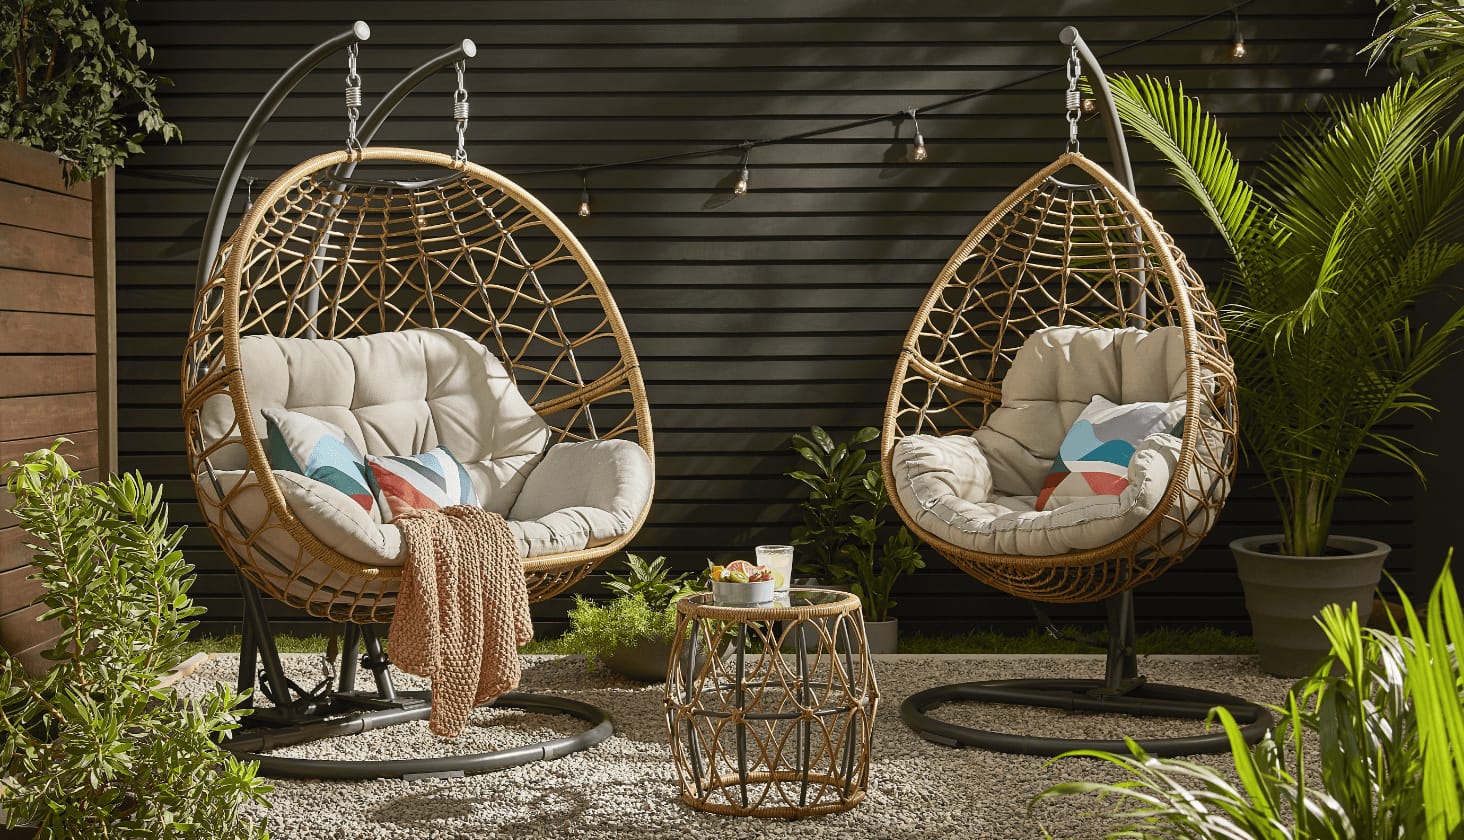 Two CANVAS Sydney Egg swing chairs with side table on a backyard patio.